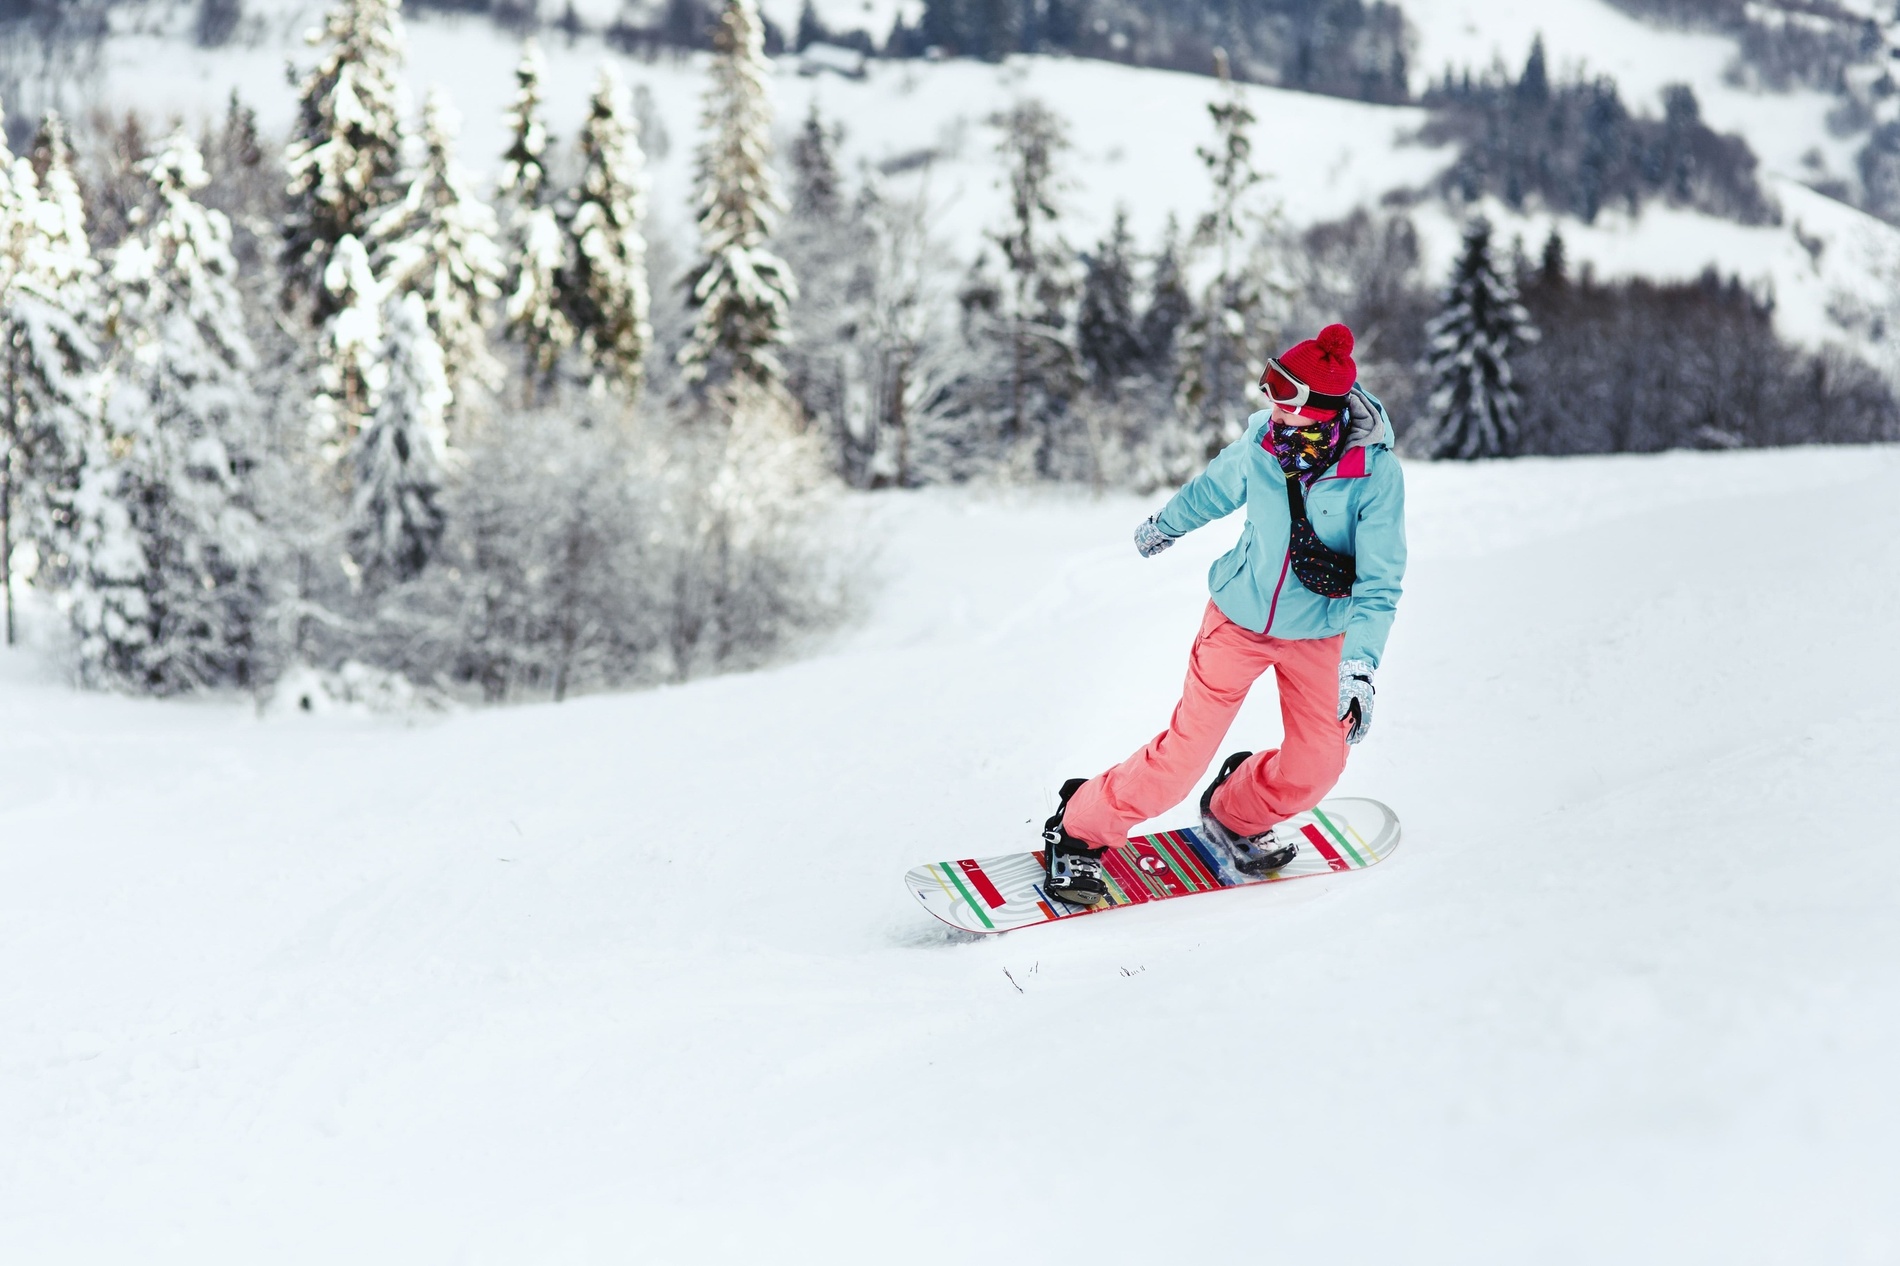 a snowboarder wearing a blue jacket and pink pants is riding down a snowy hill